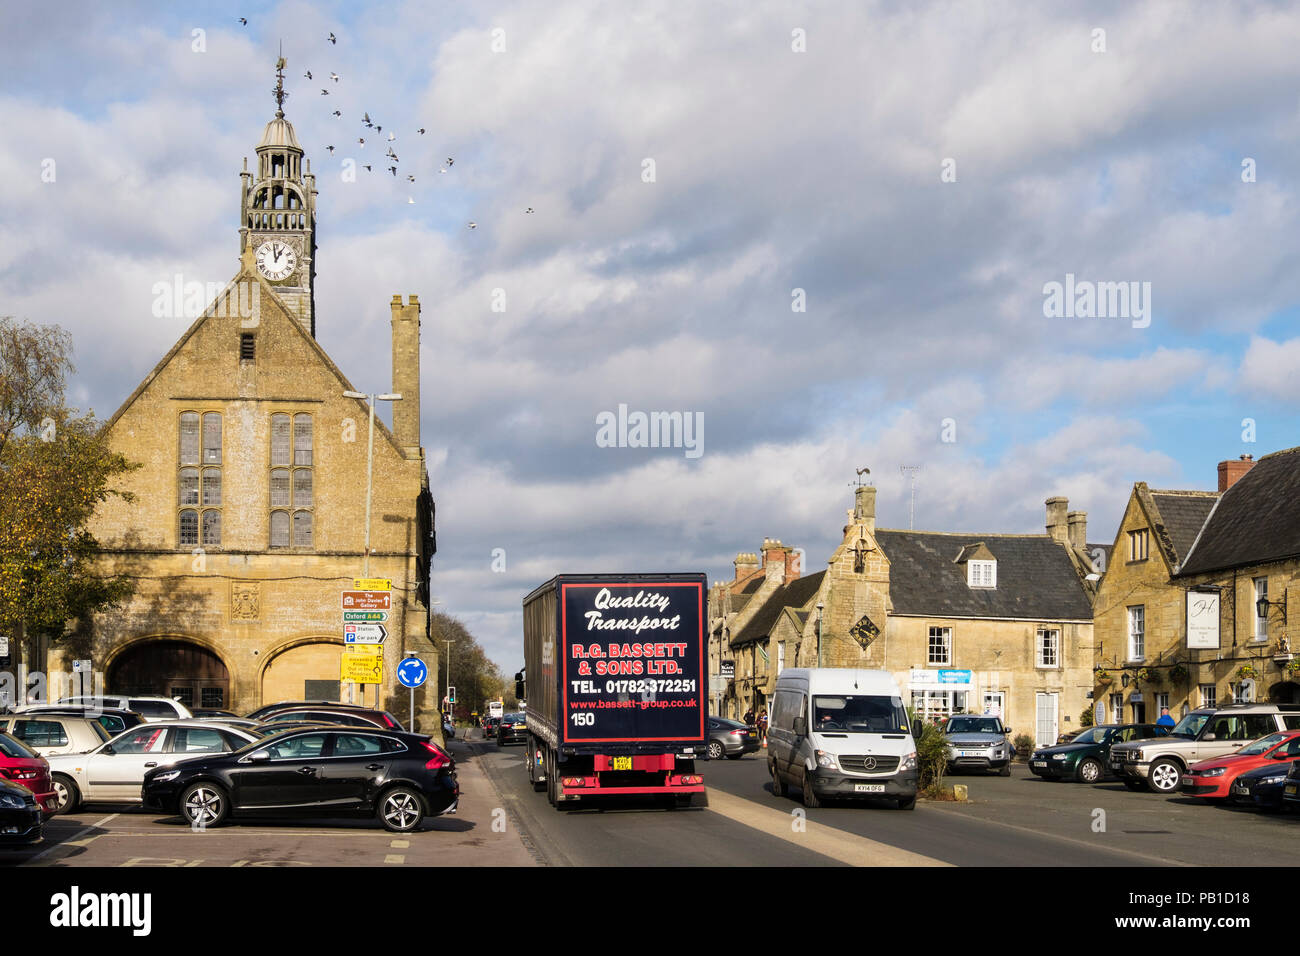 Cars parked by Redesdale Hall on busy congested High Street, Moreton-in-Marsh, Gloucestershire, Cotswolds, England, UK, Britain Stock Photo